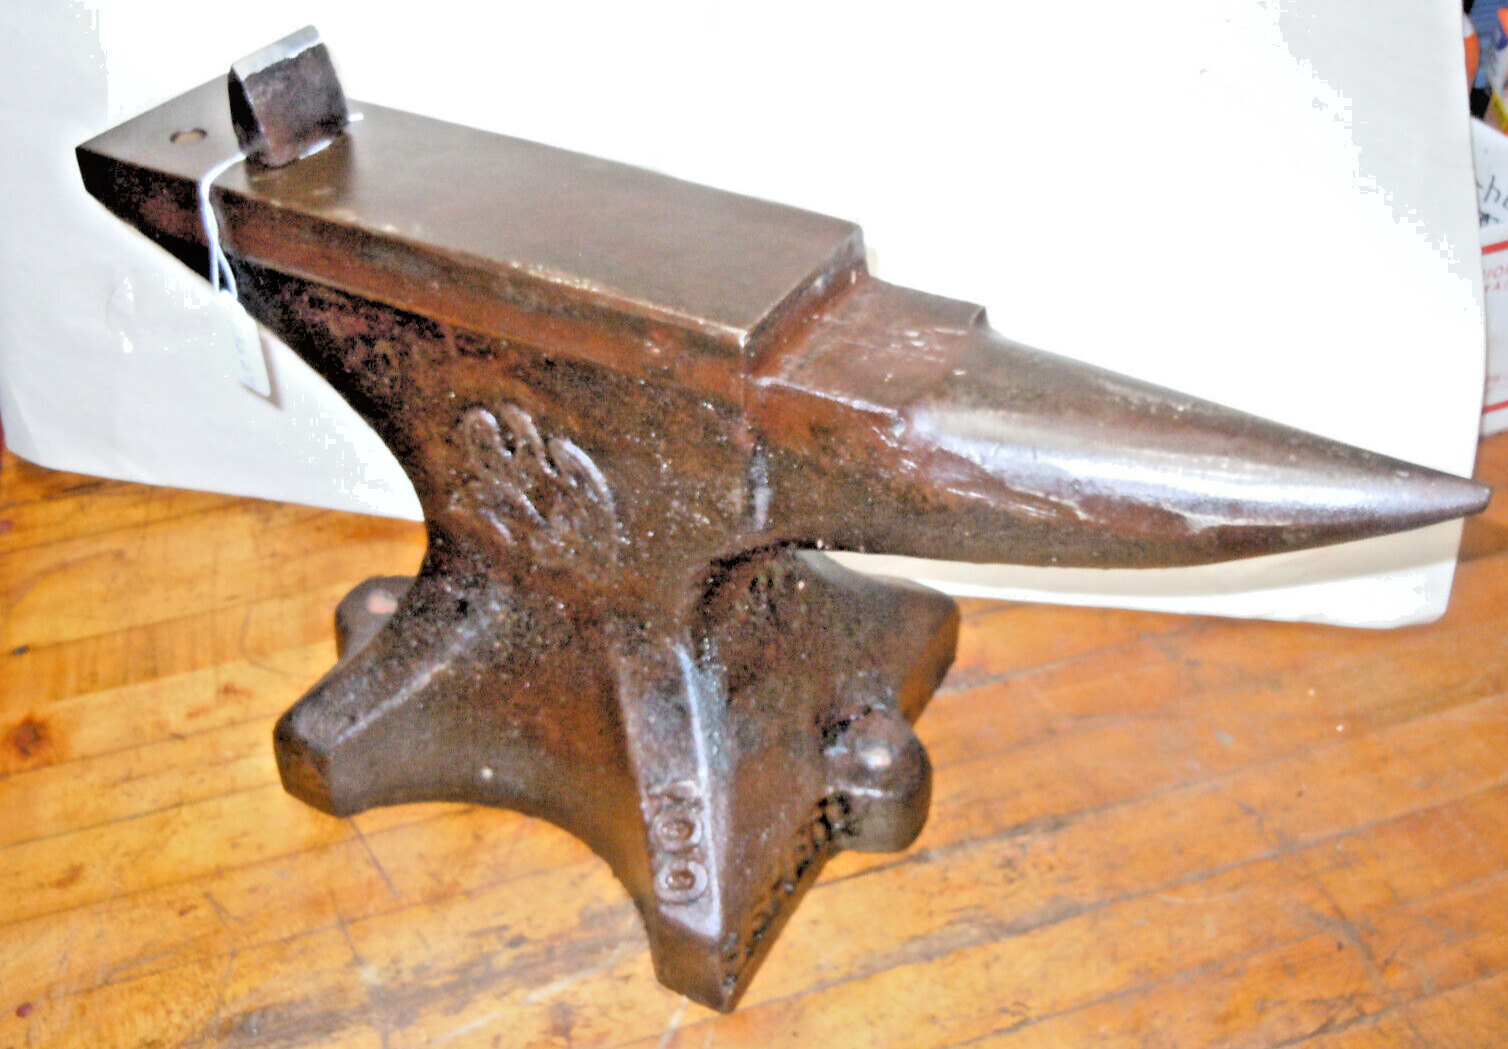 FISHER VINTAGE 1901 No. 100 EAGLE BLACKSMITH ANVIL, WEIGHS 100 lbs.